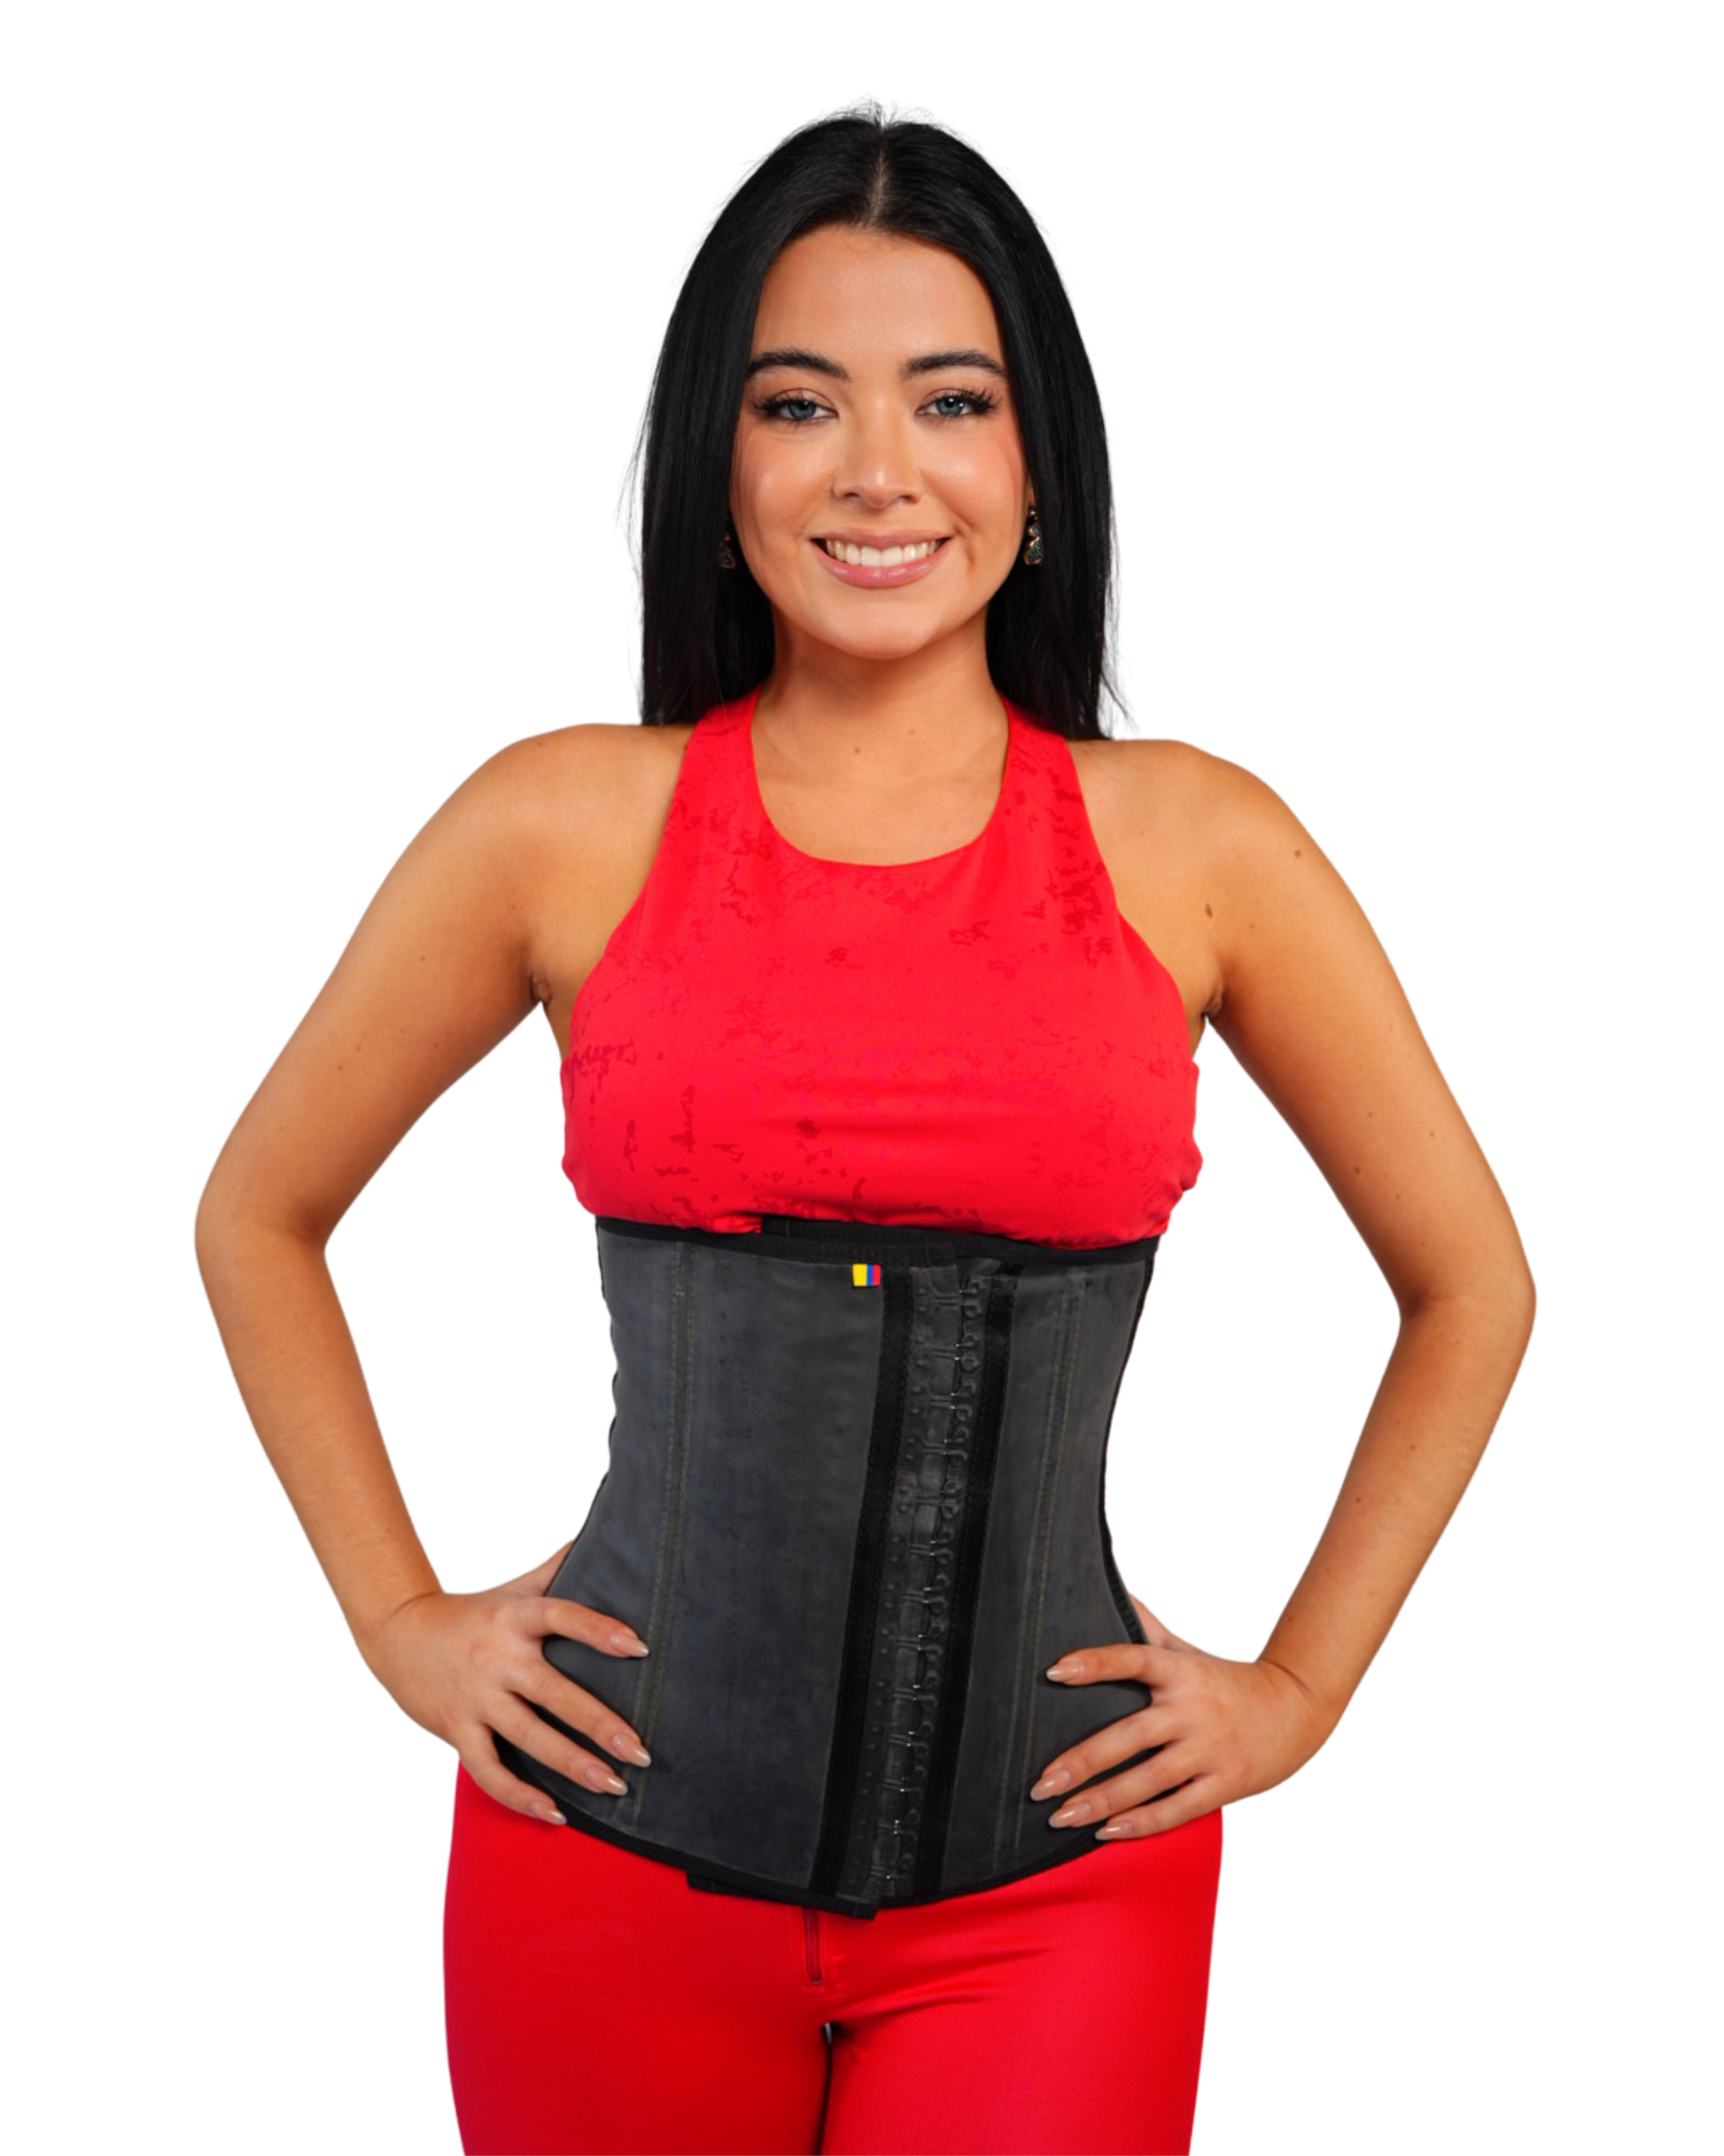 Women's Sports Latex Waist Trainer Corset For Waist Training And Tummy  Control, Slimming Chest Binder Strap